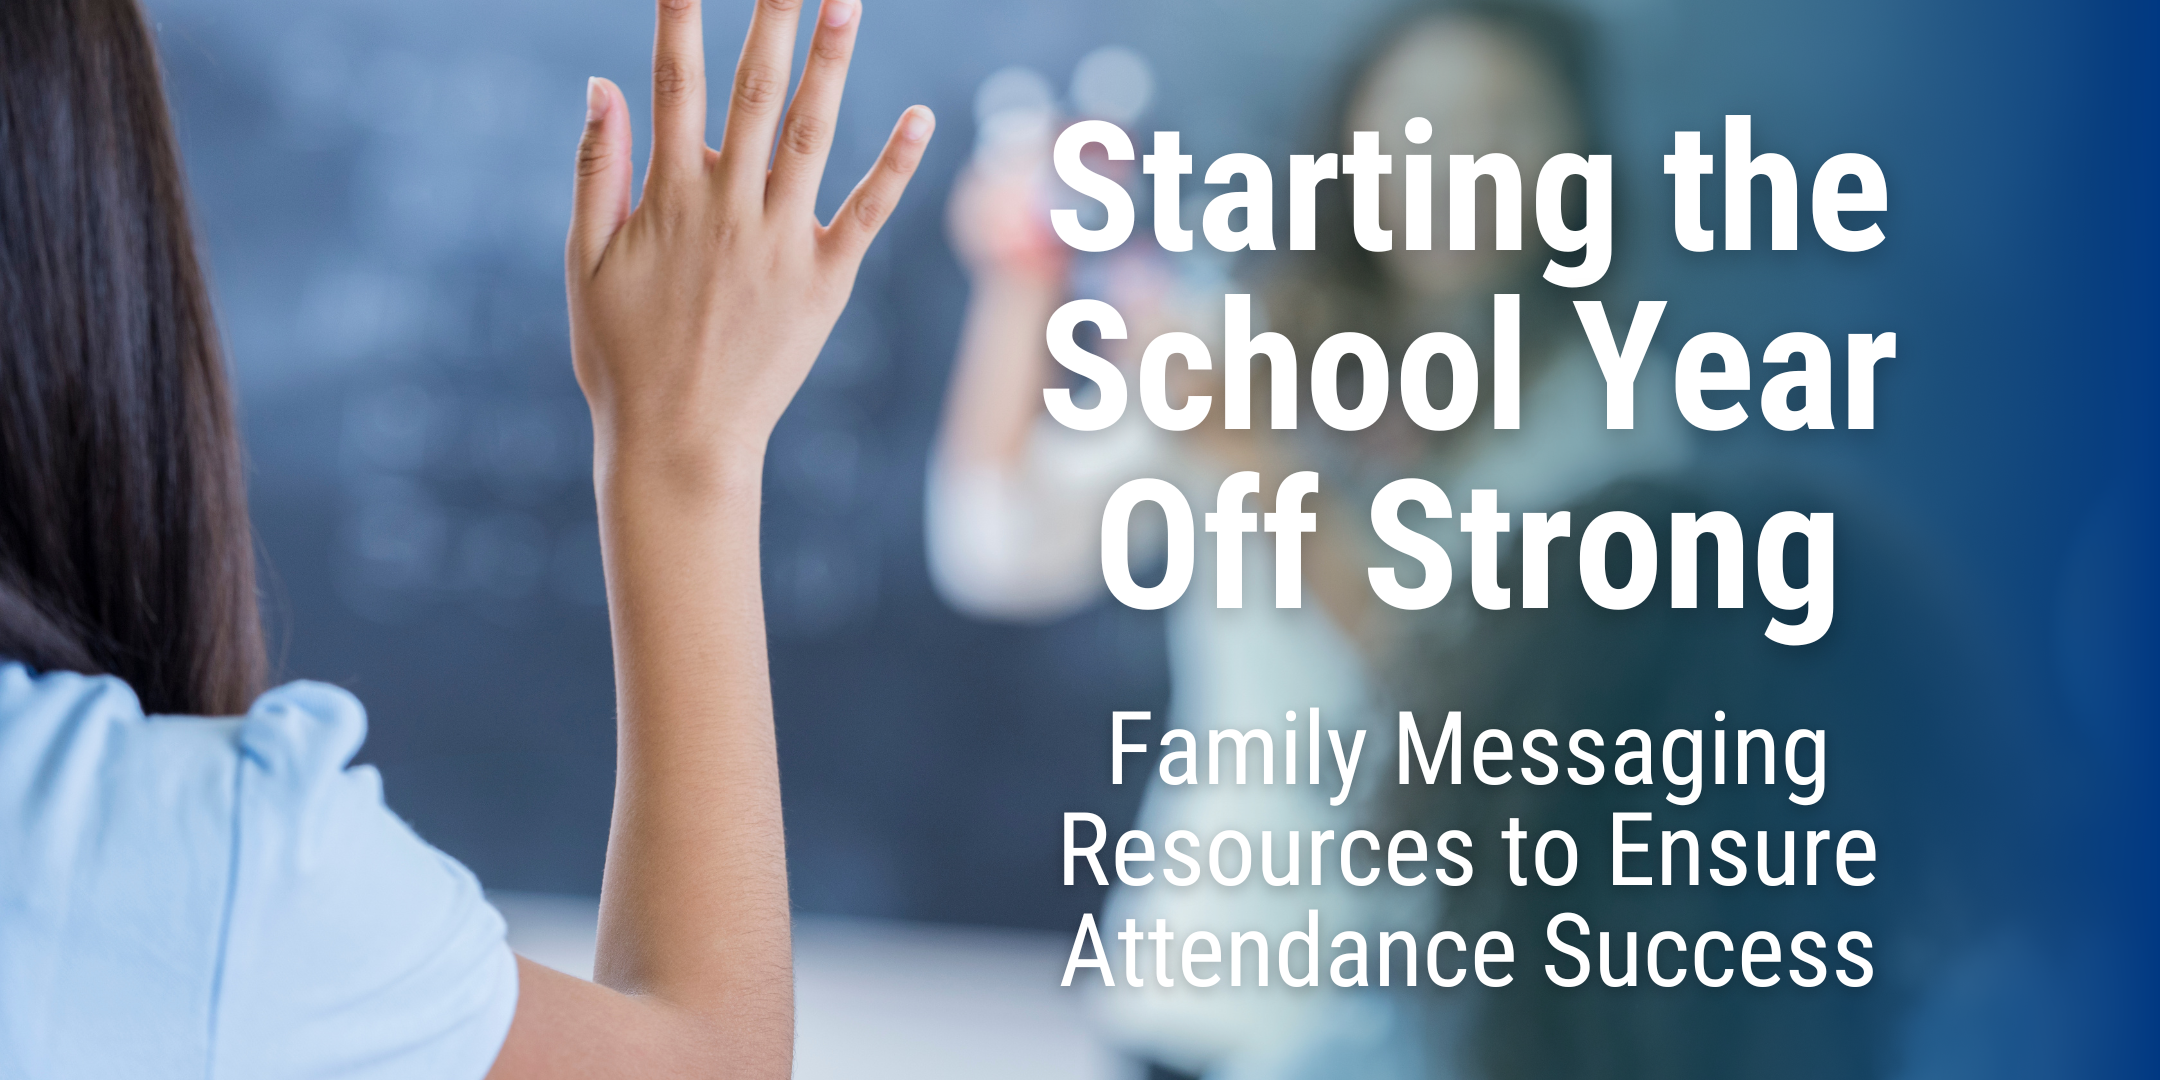 Banner featuring a young female student raising her hand in a classroom setting, displaying blog title "Starting the School Year Off Strong: Family Messaging Resources to Ensure Attendance Success:.